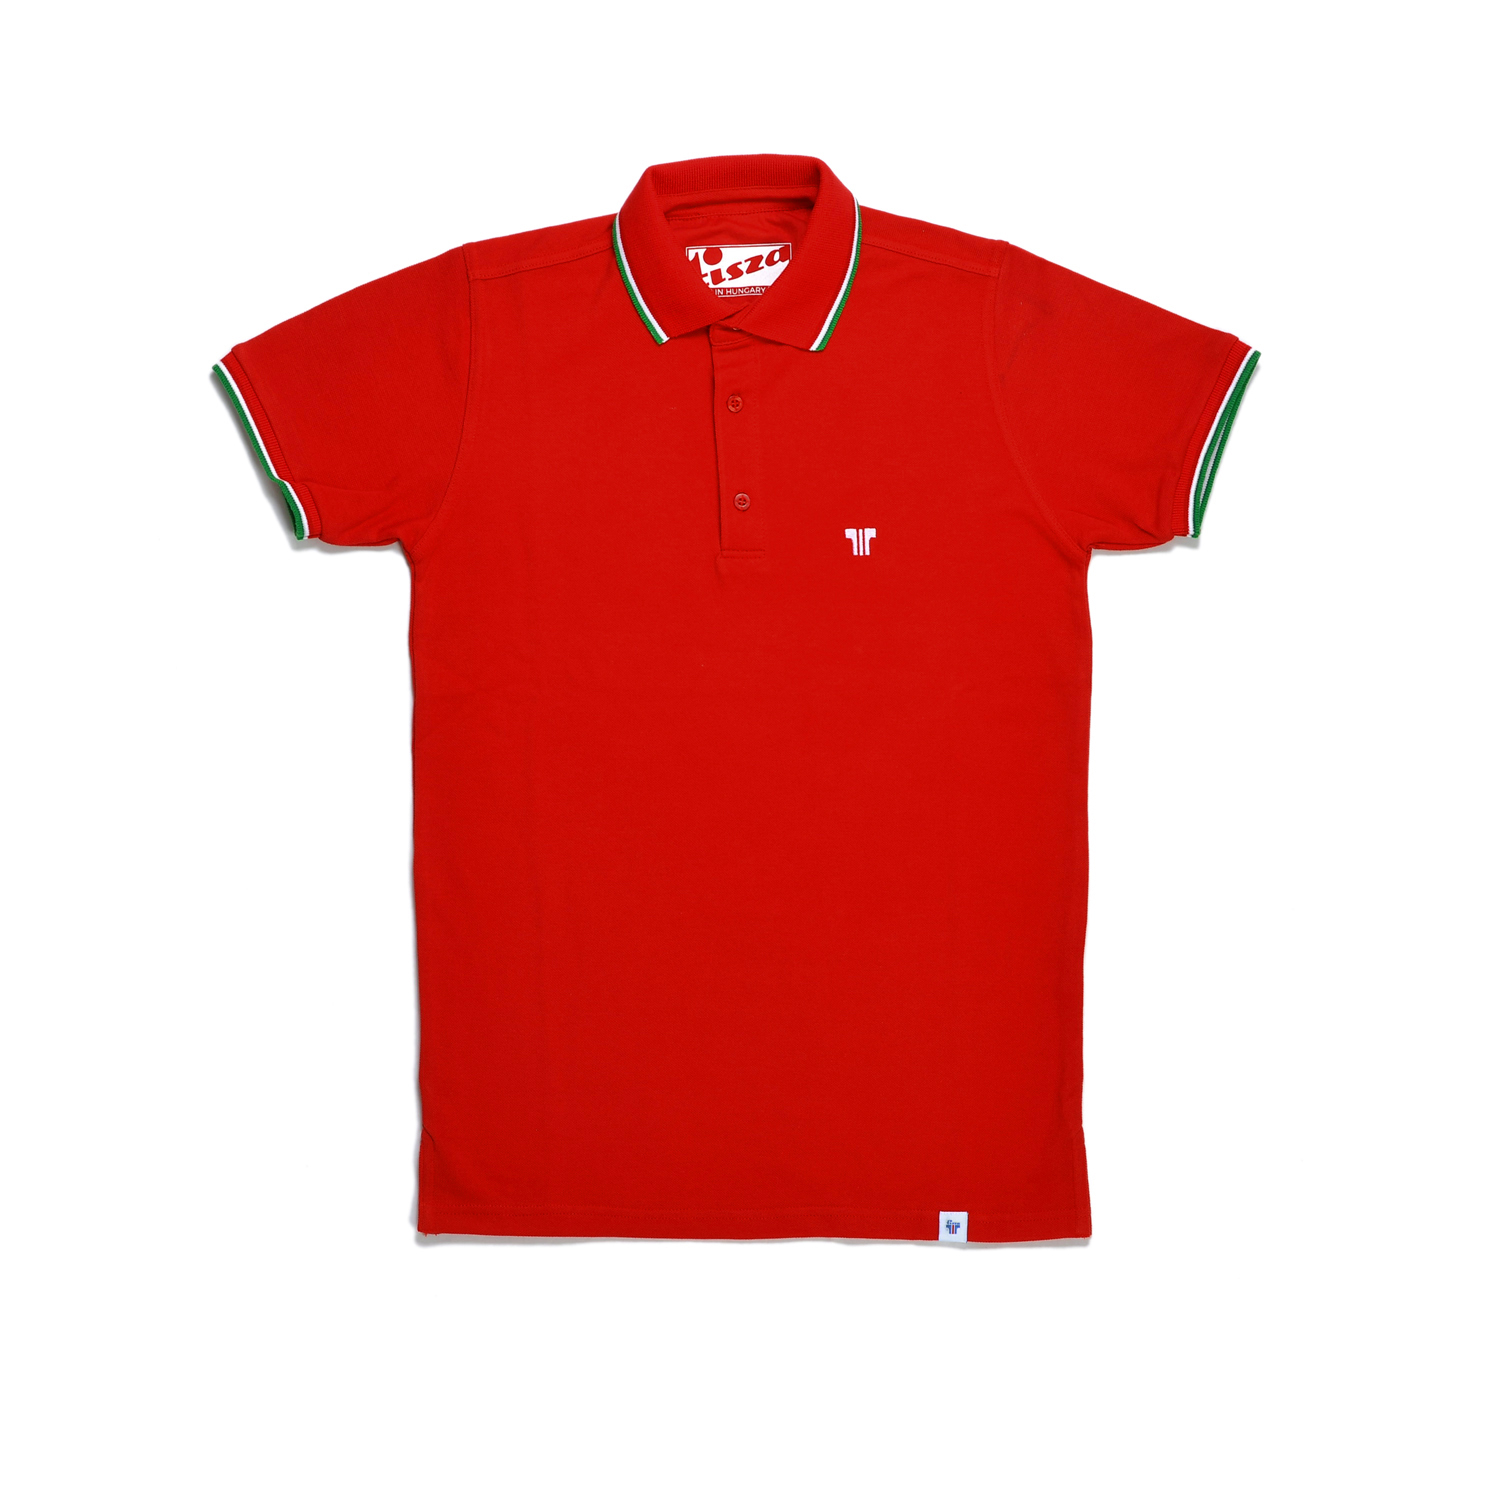 Tisza shoes - Tennis Shirt - Red olympiad